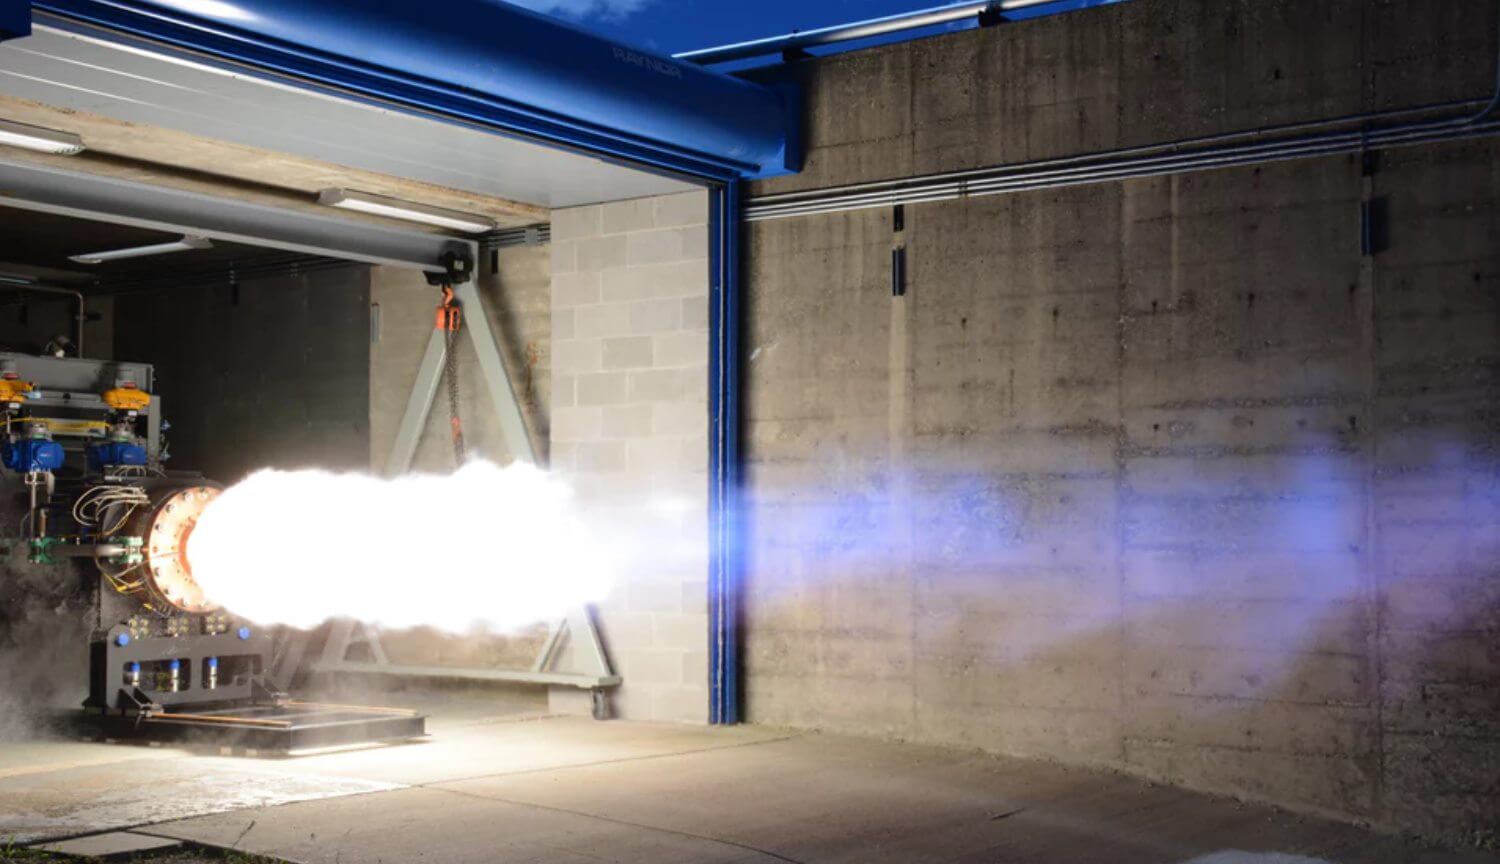 Test firing of the spacecraft engine, the Dream Chaser completed successfully